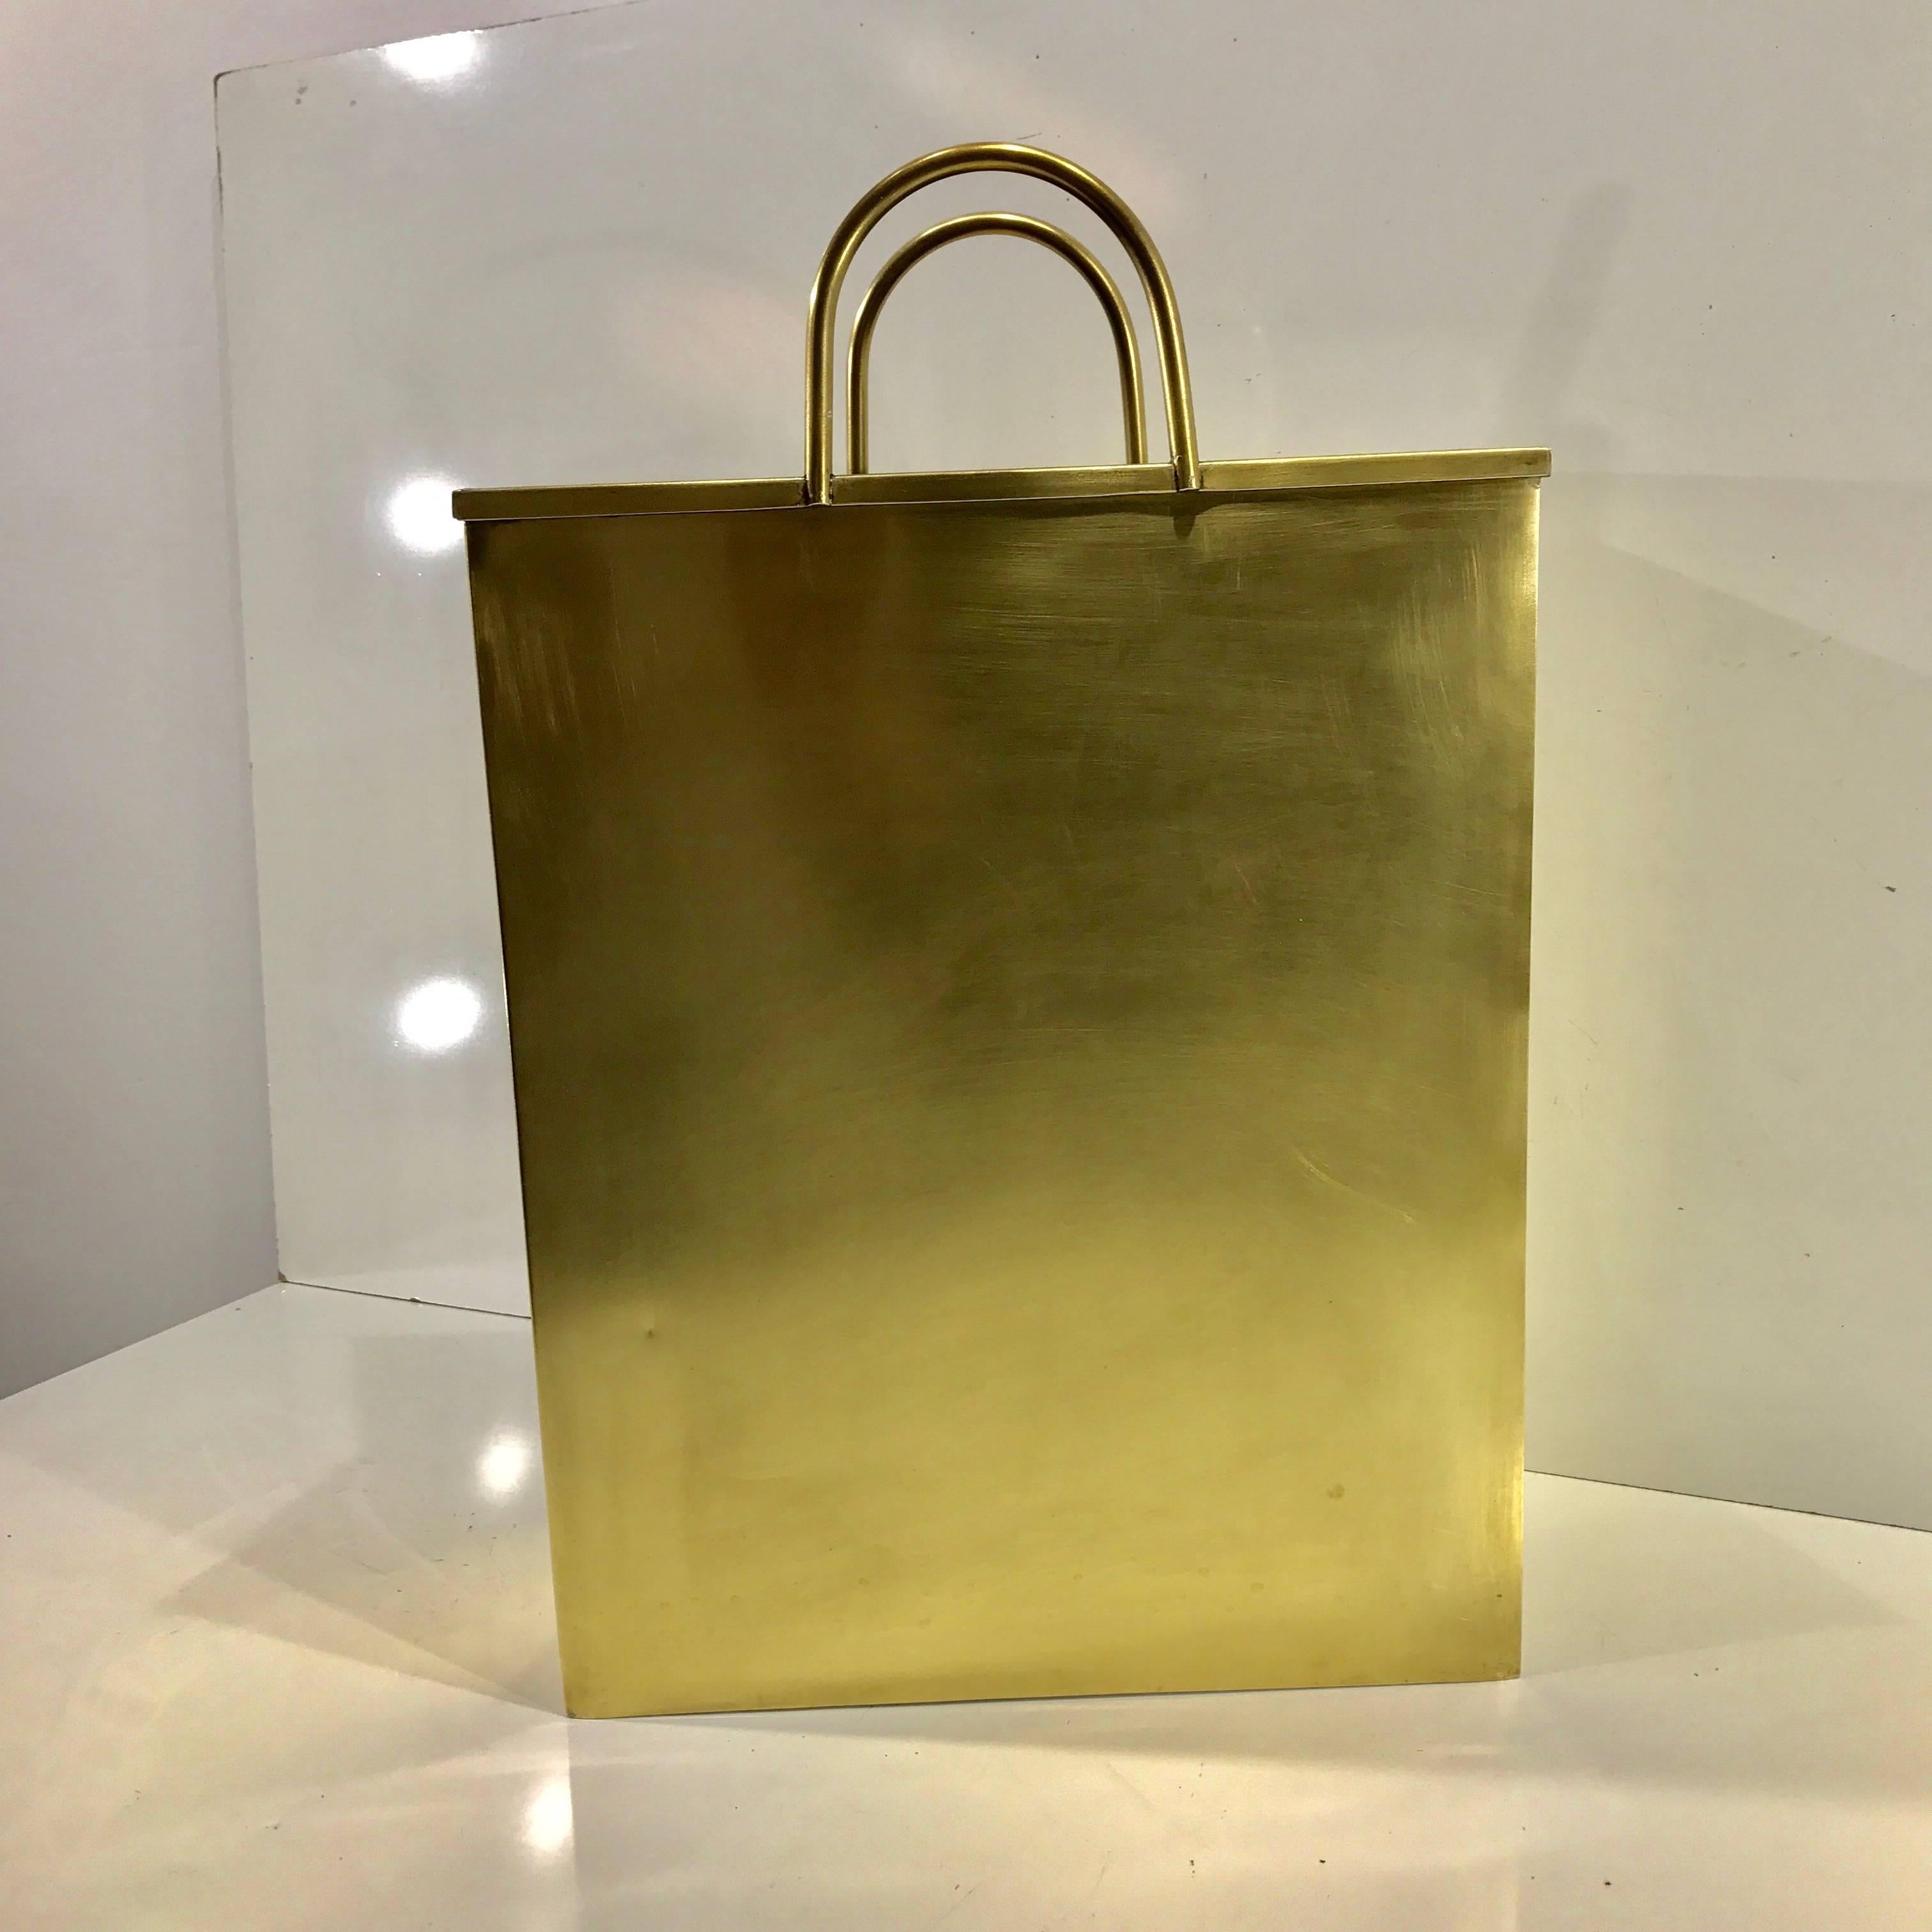 Gio Ponti, attributed brushed brass shopping bag magazine/umbrella stand, realistically cast and modeled, perfect for magazines or umbrellas. Stamped 